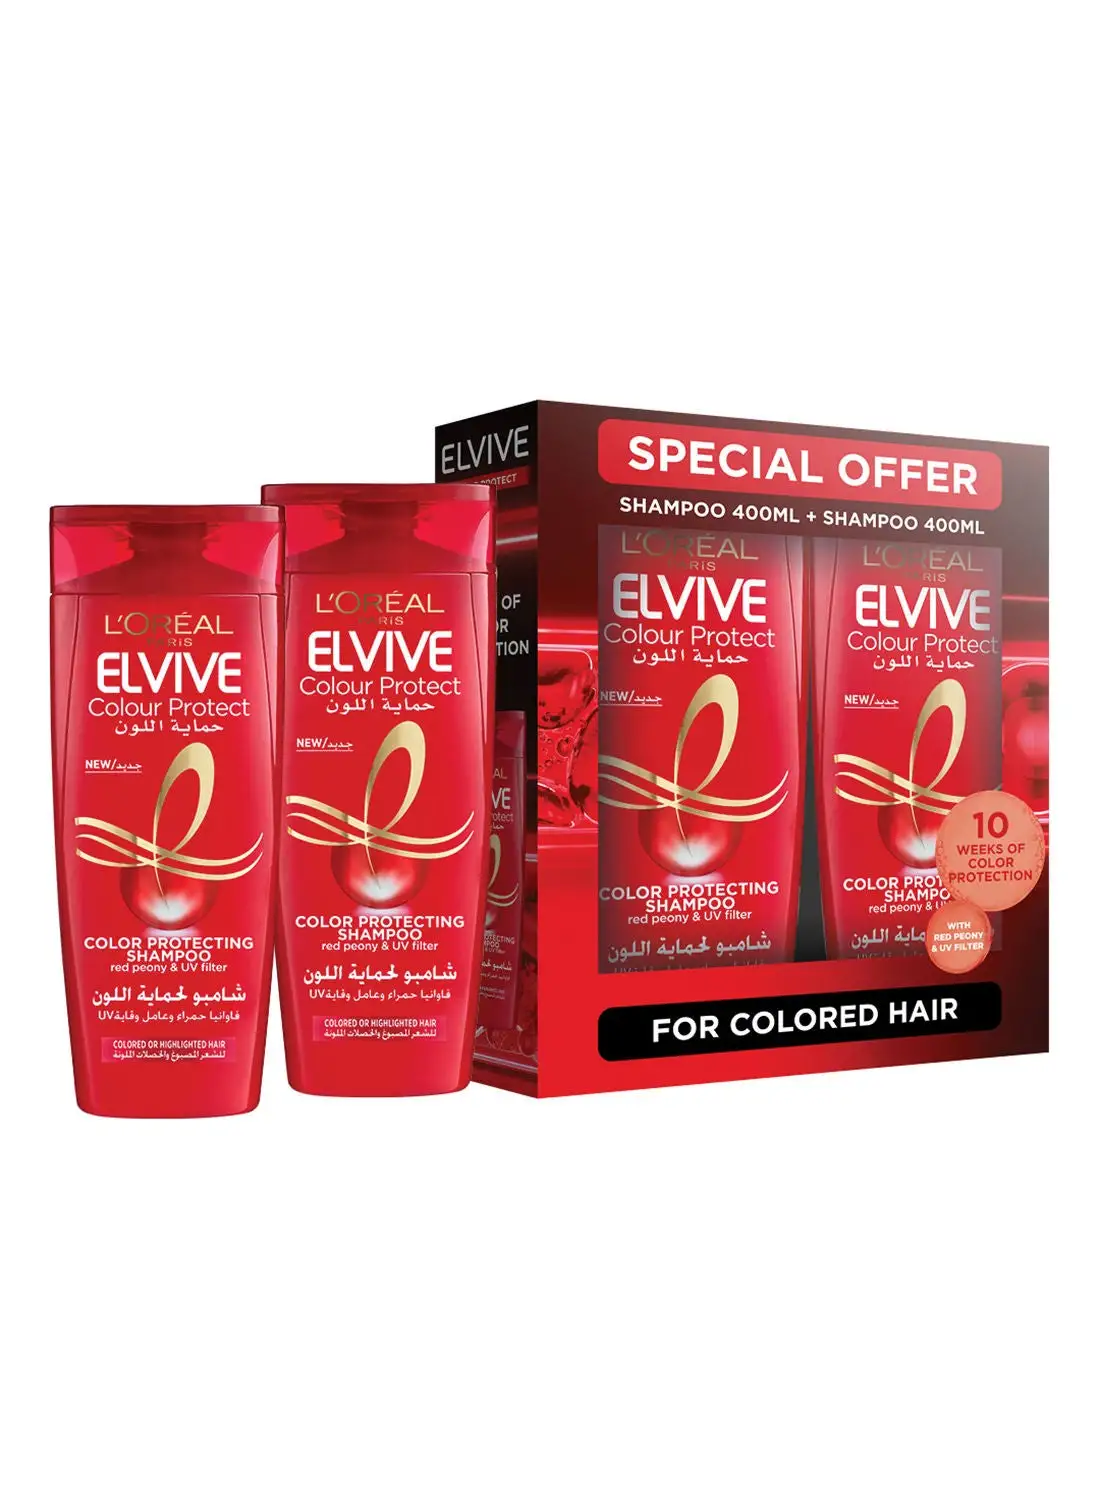 L'OREAL PARIS Elvive Color Protect Shampoo 400ml Twin Pack